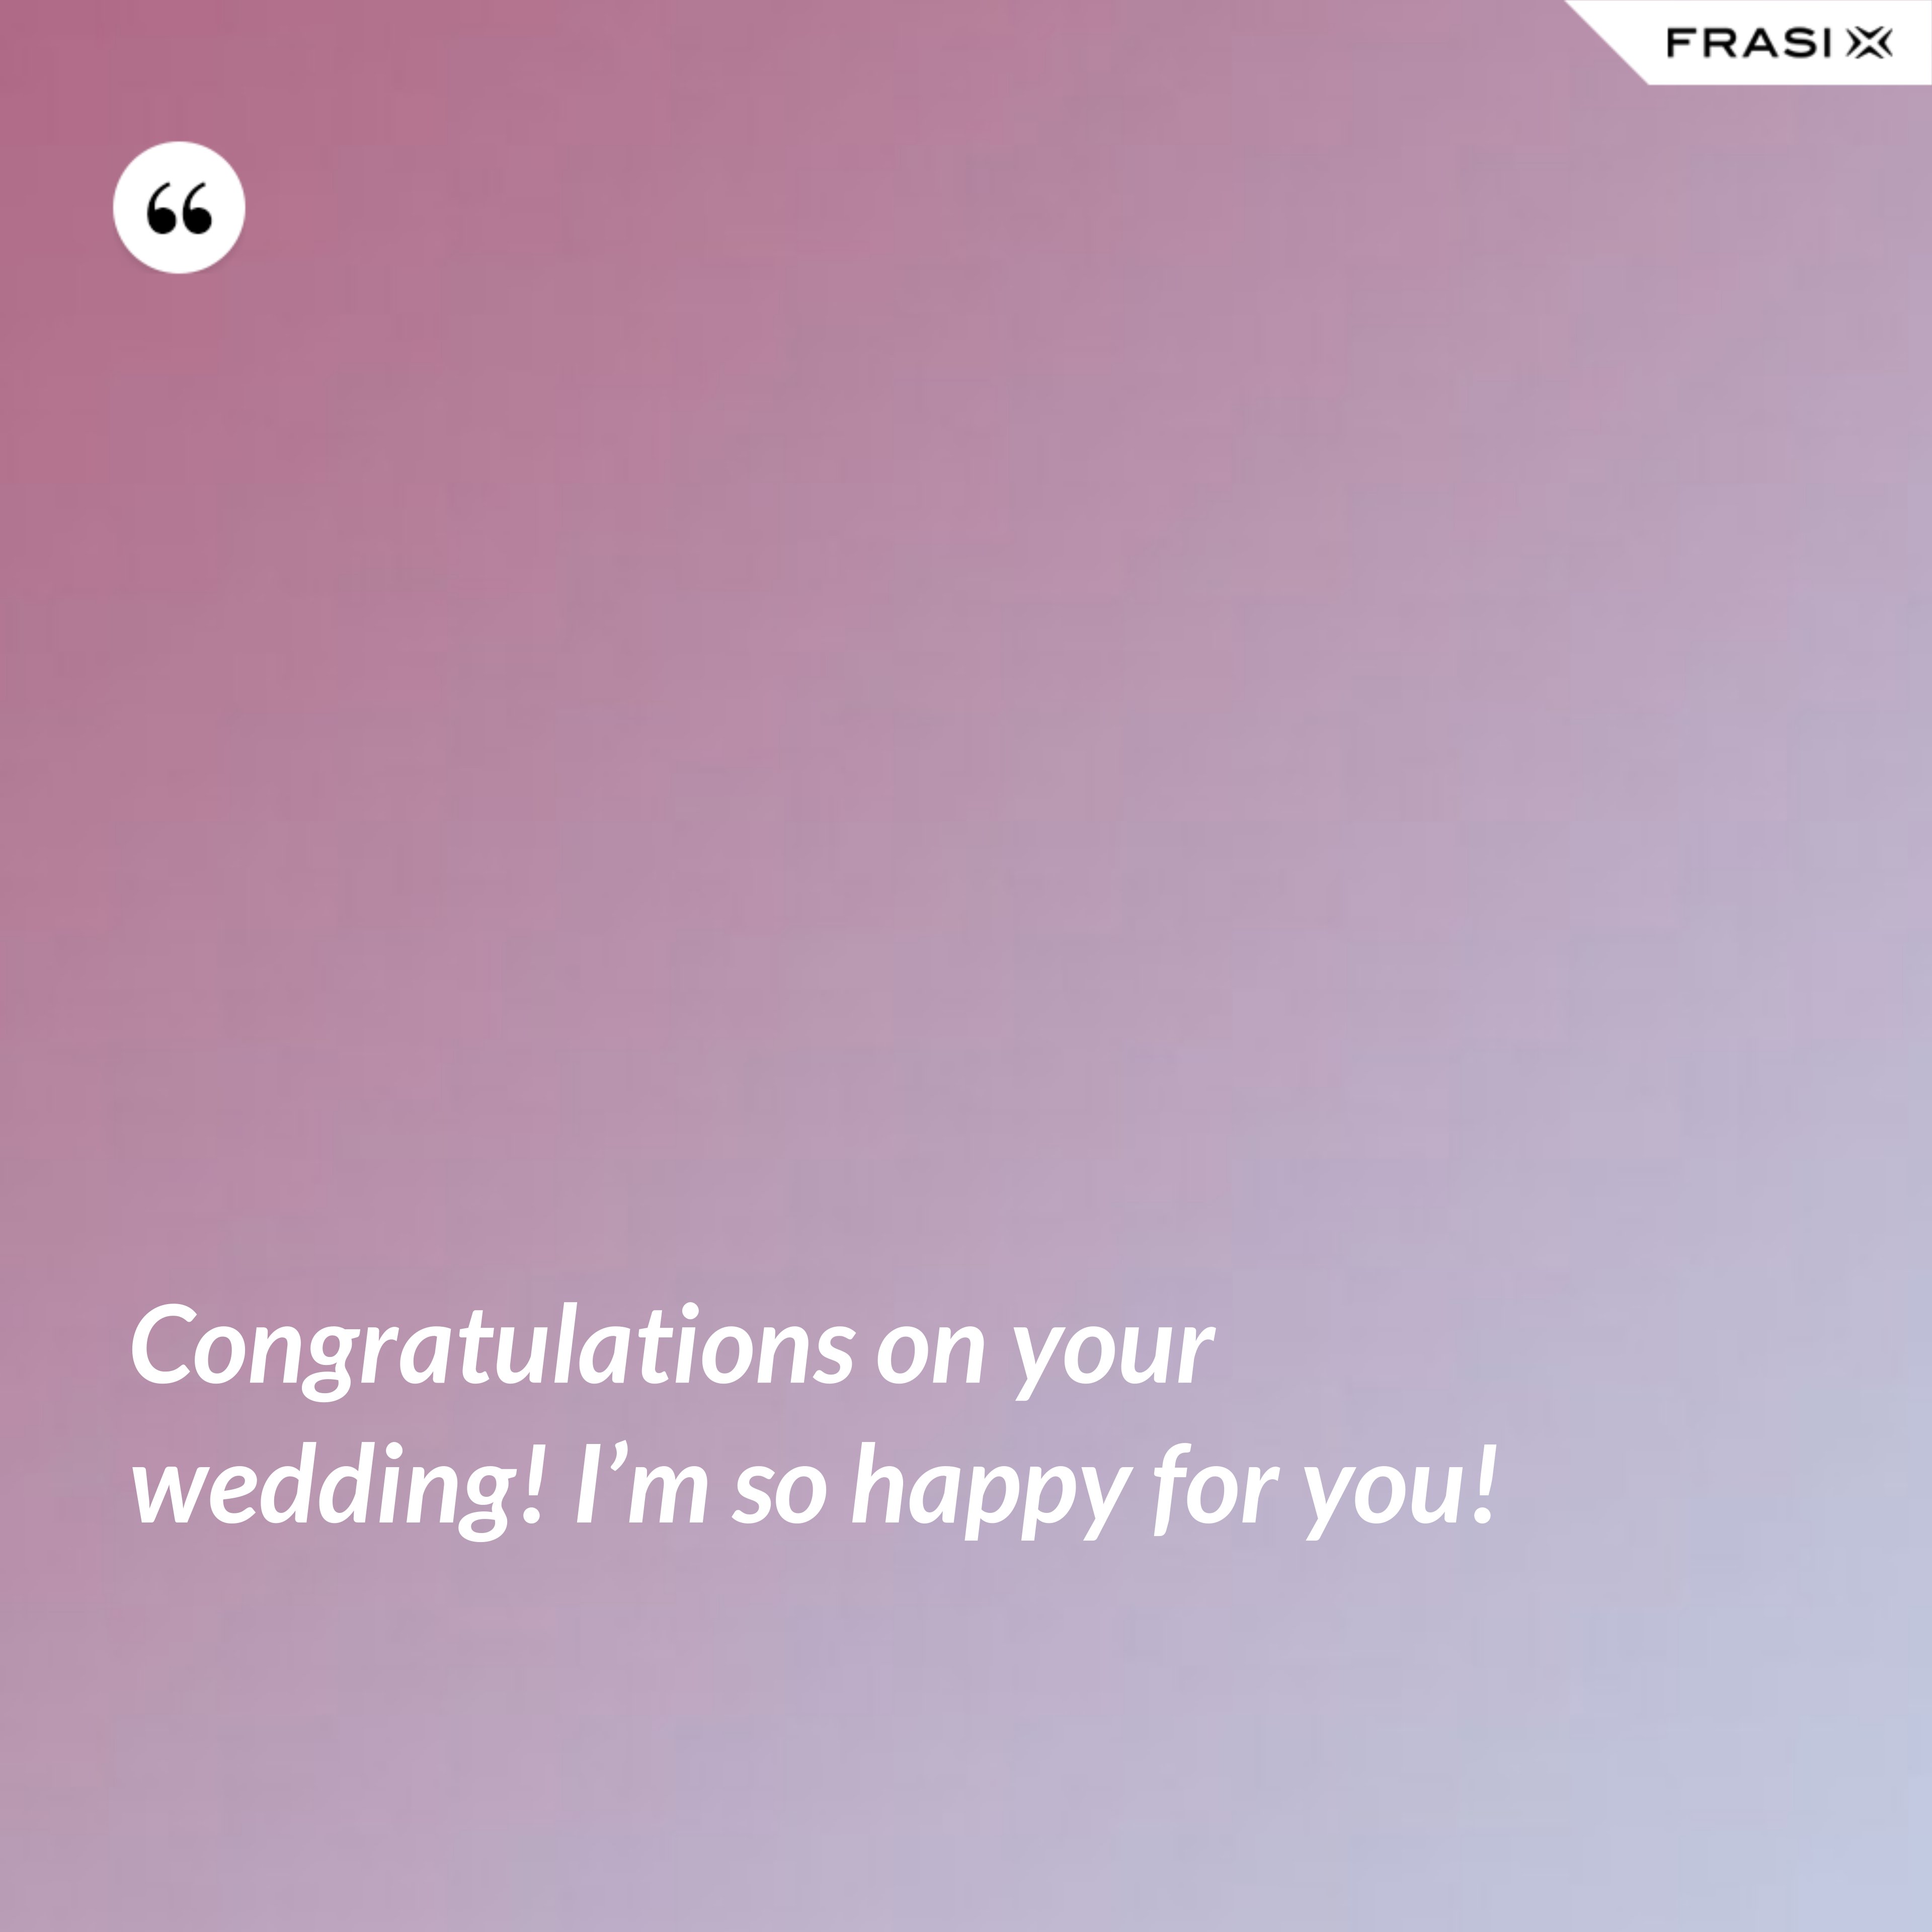 Congratulations on your wedding! I’m so happy for you! - Anonimo